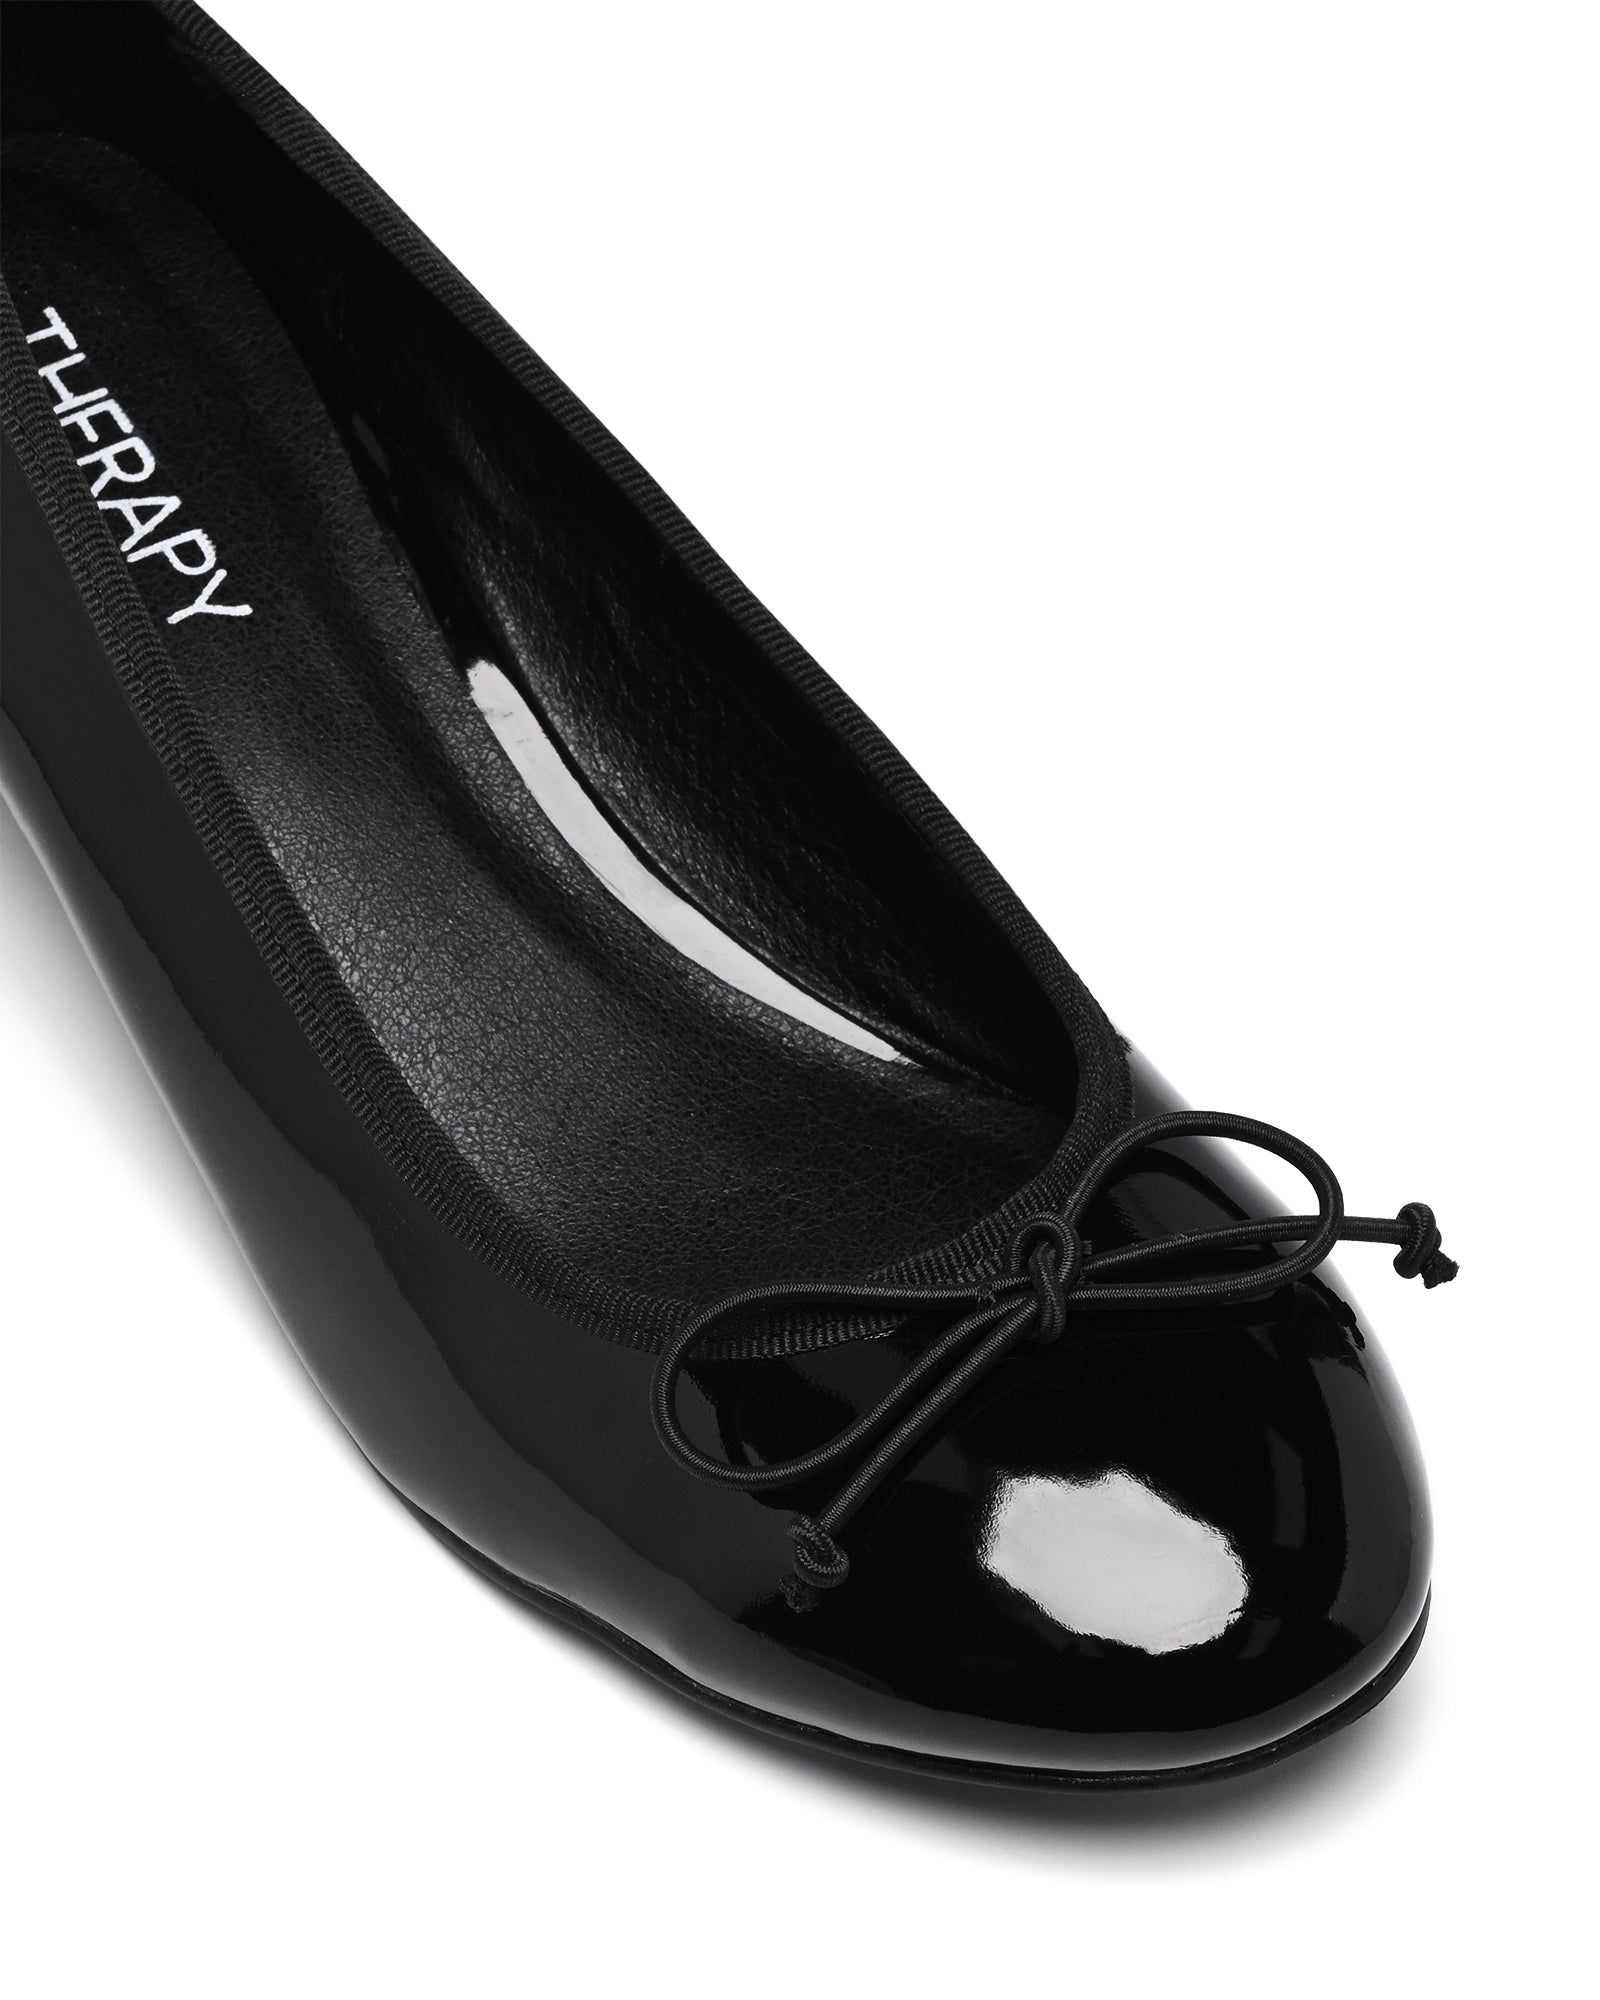 Therapy Shoes Diana Black Patent | Women's Ballet | Heels | Flats